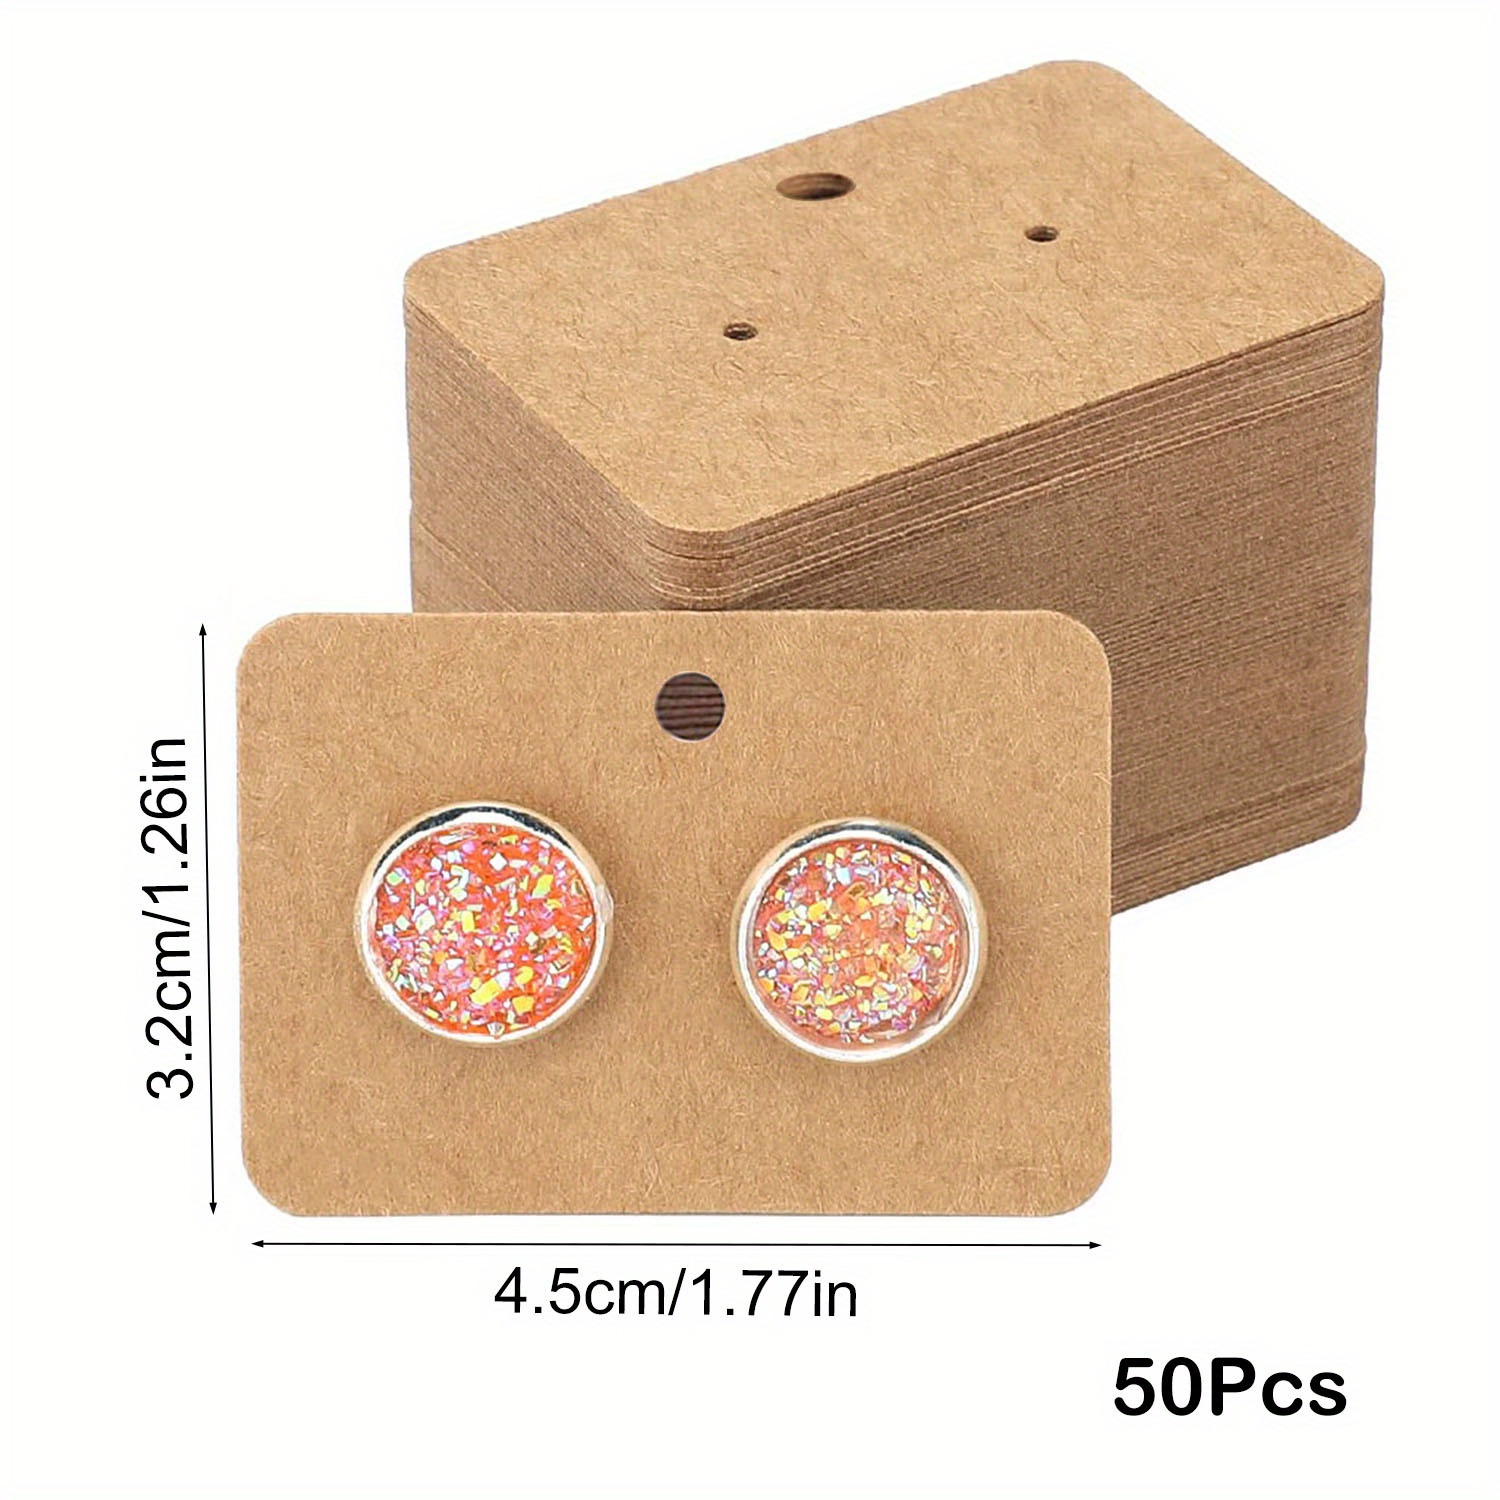 50Pcs/pack Cute Printed Earring Display Card Earring Card Holder Blank  Kraft Paper Tags for Diy Jewelry Making Accessories Earing Storage Card